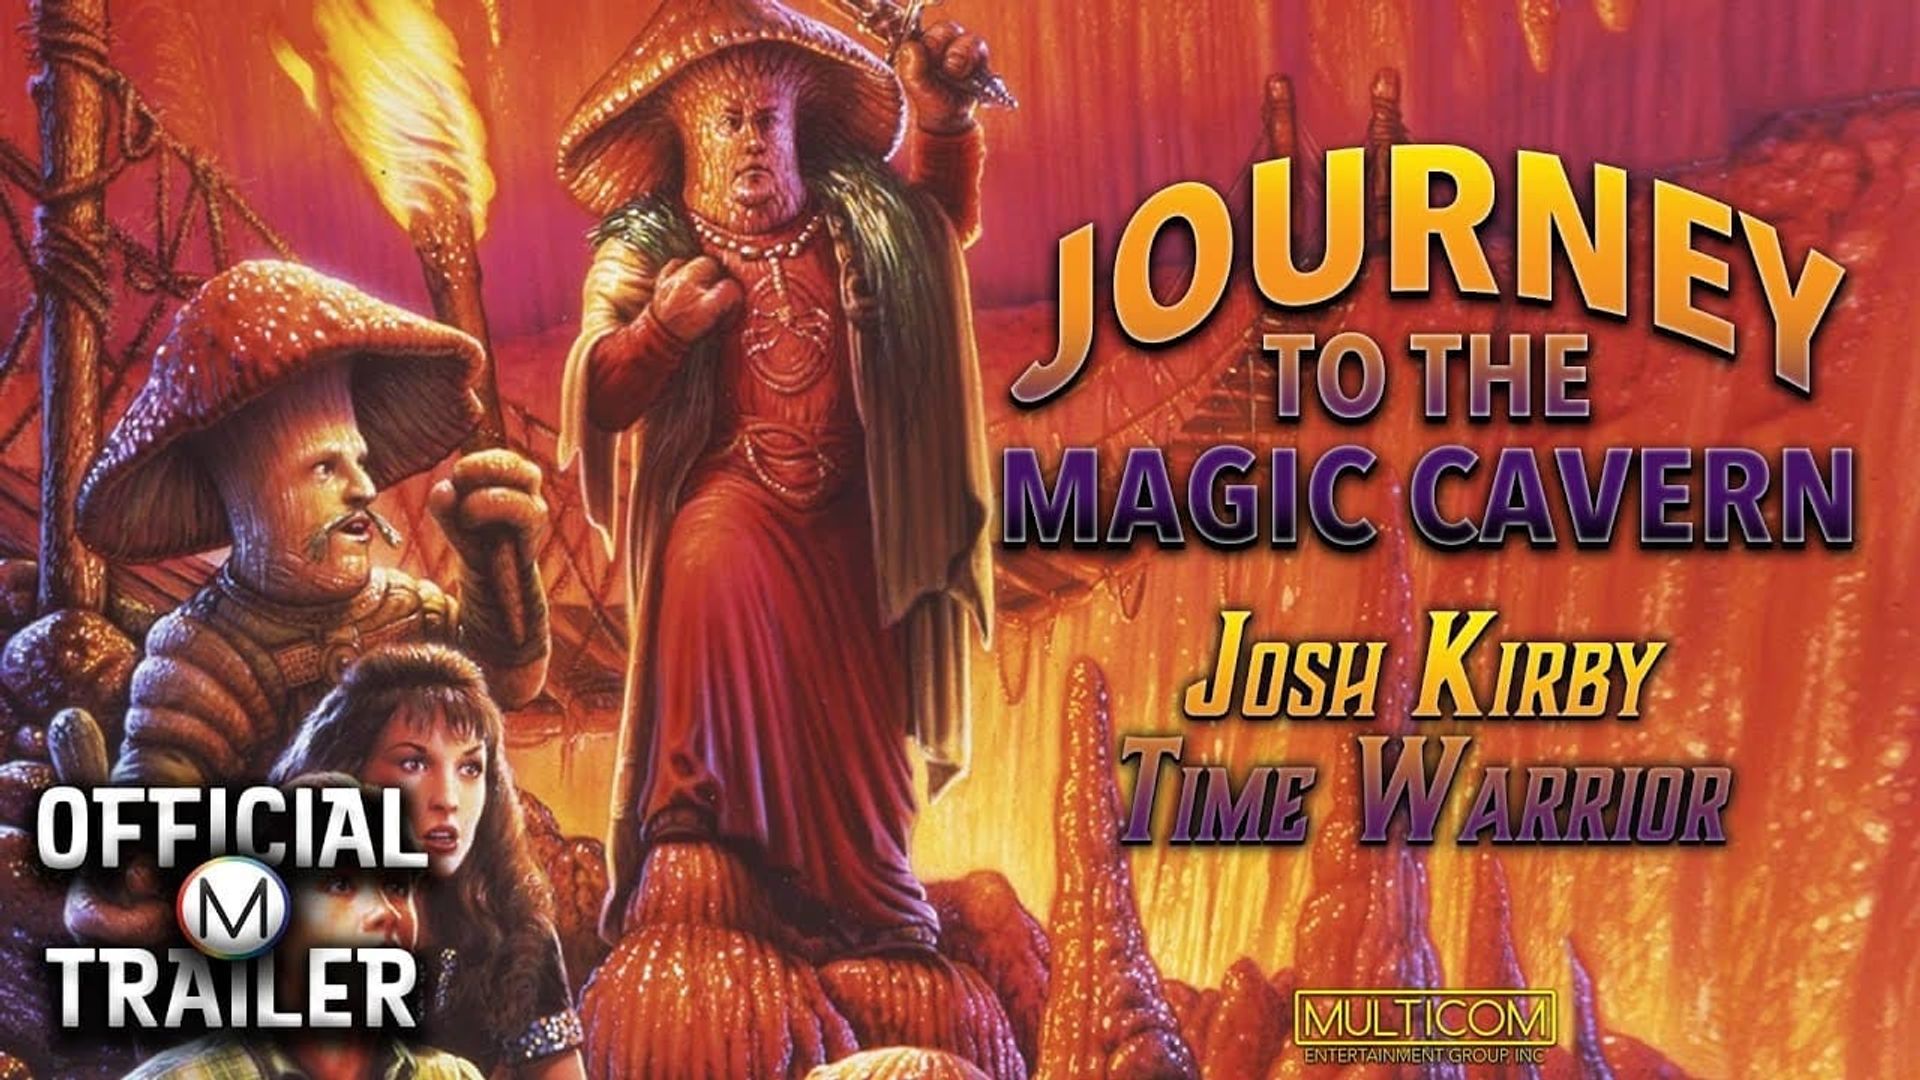 Josh Kirby: Time Warrior! Chap. 5: Journey to the Magic Cavern background